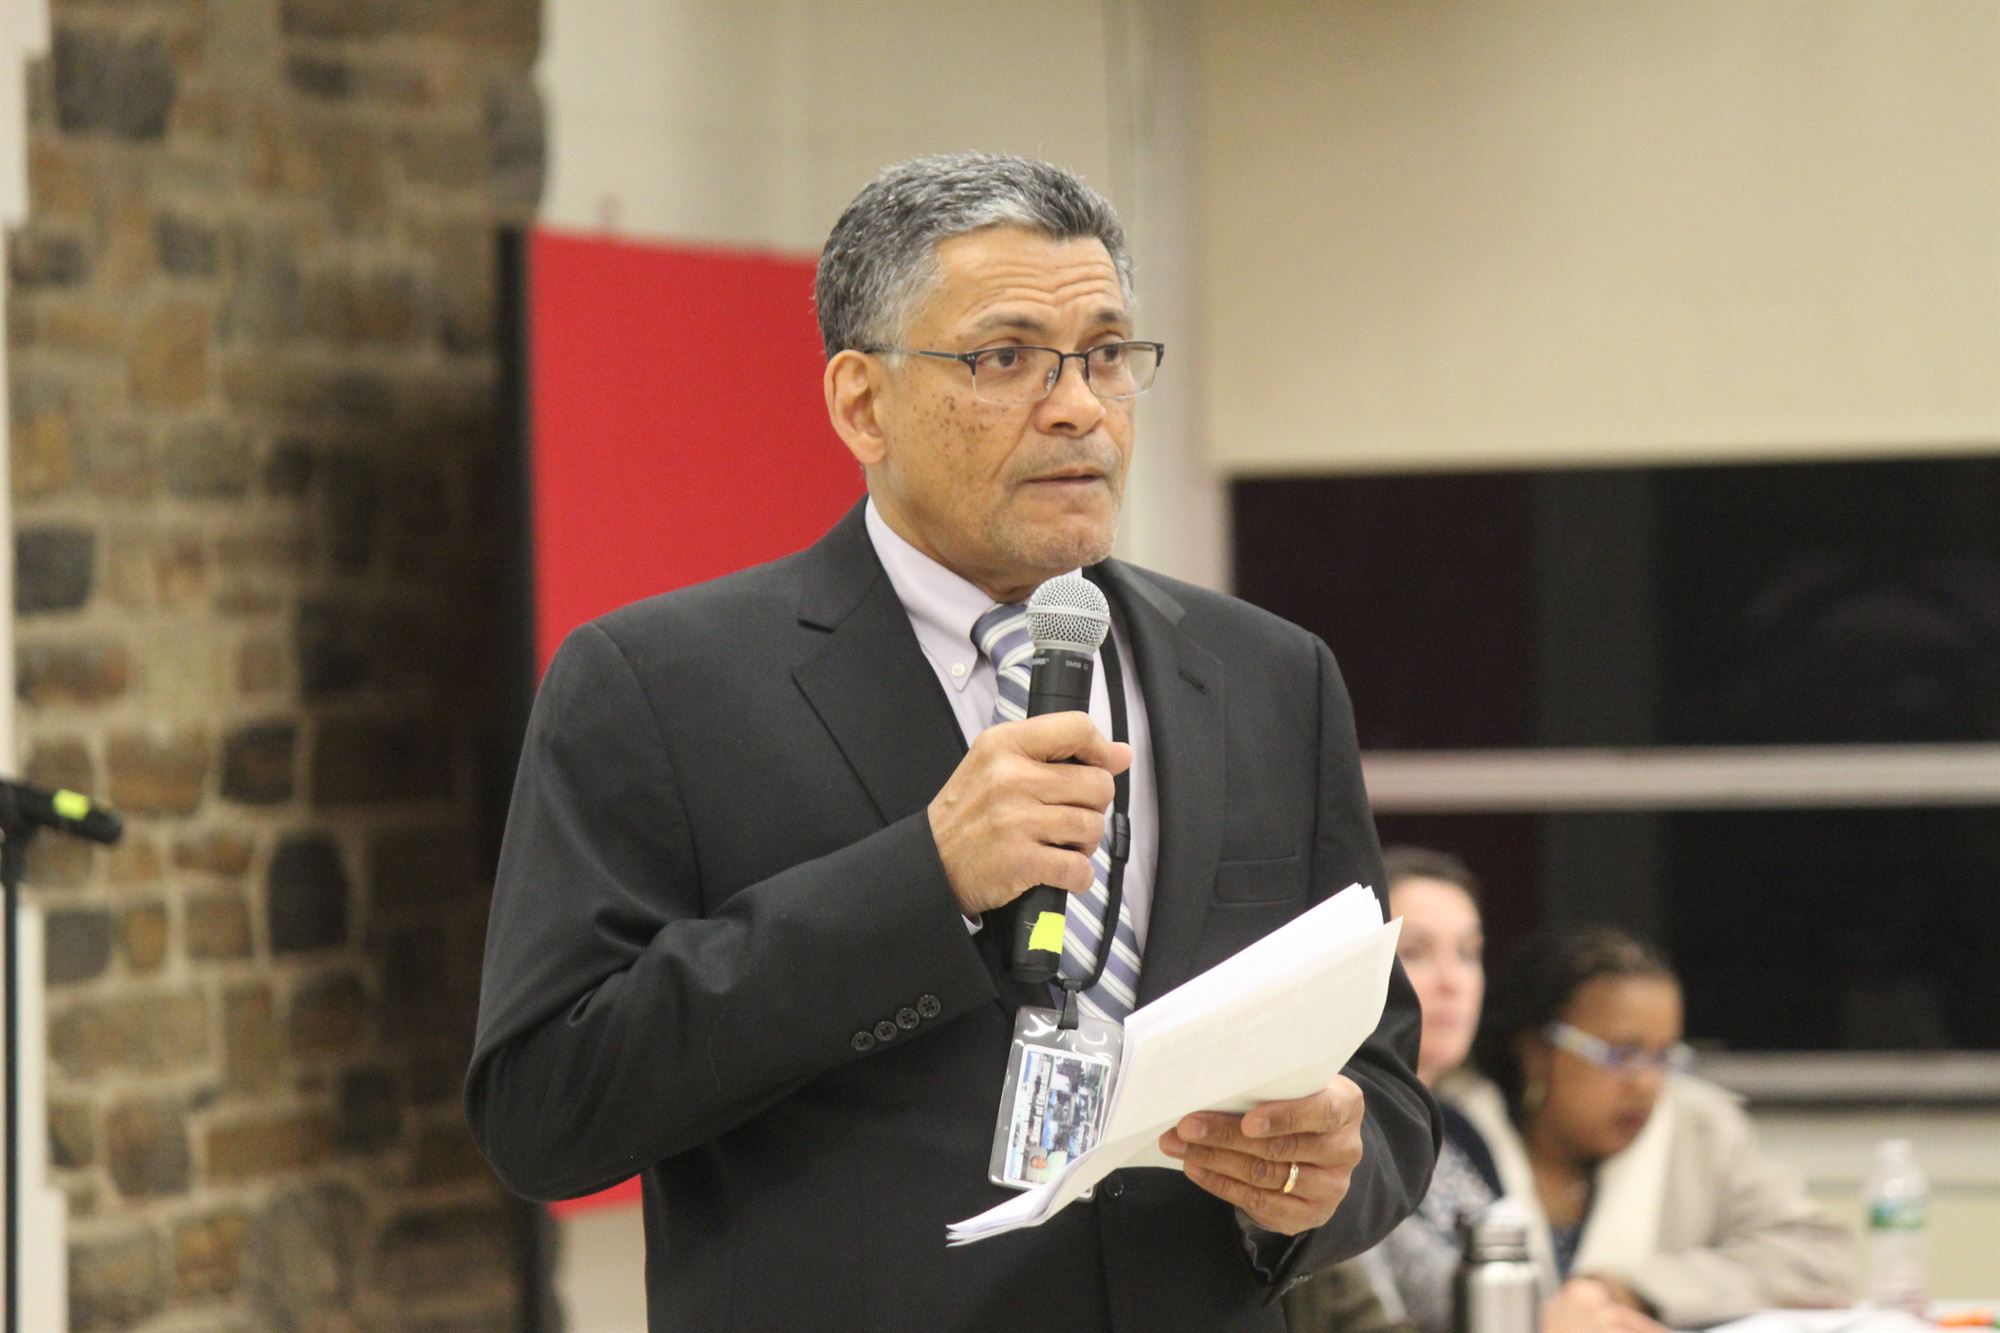 UPDATED: Ramos to Leave South Orange-Maplewood School District - The Village Green